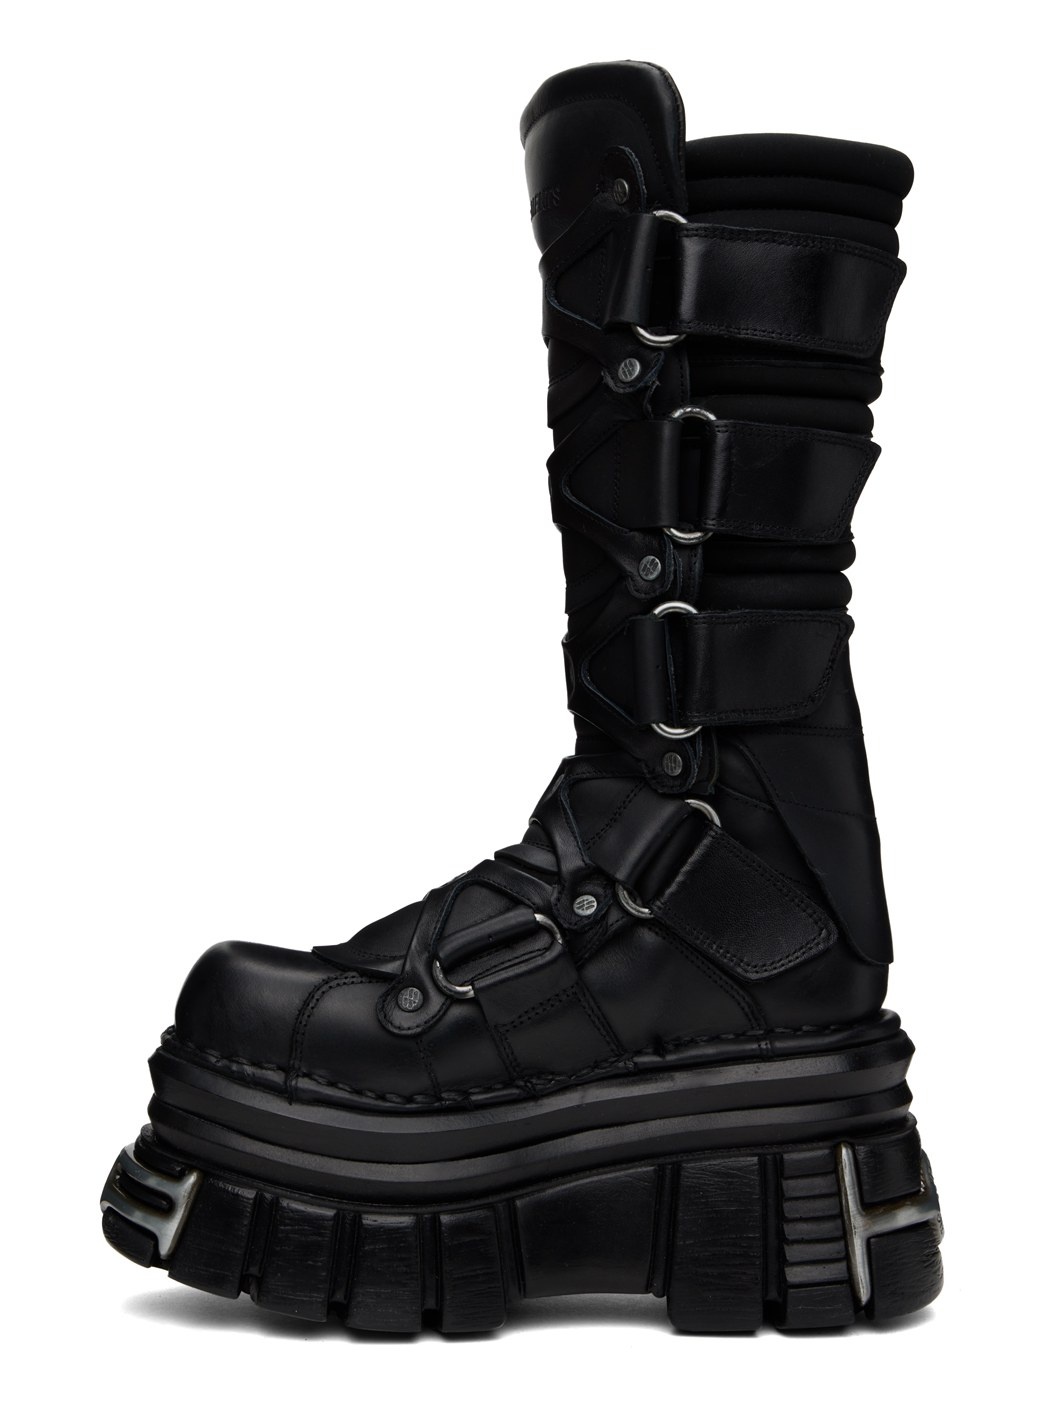 Black New Rock Edition Tower Boots - 3